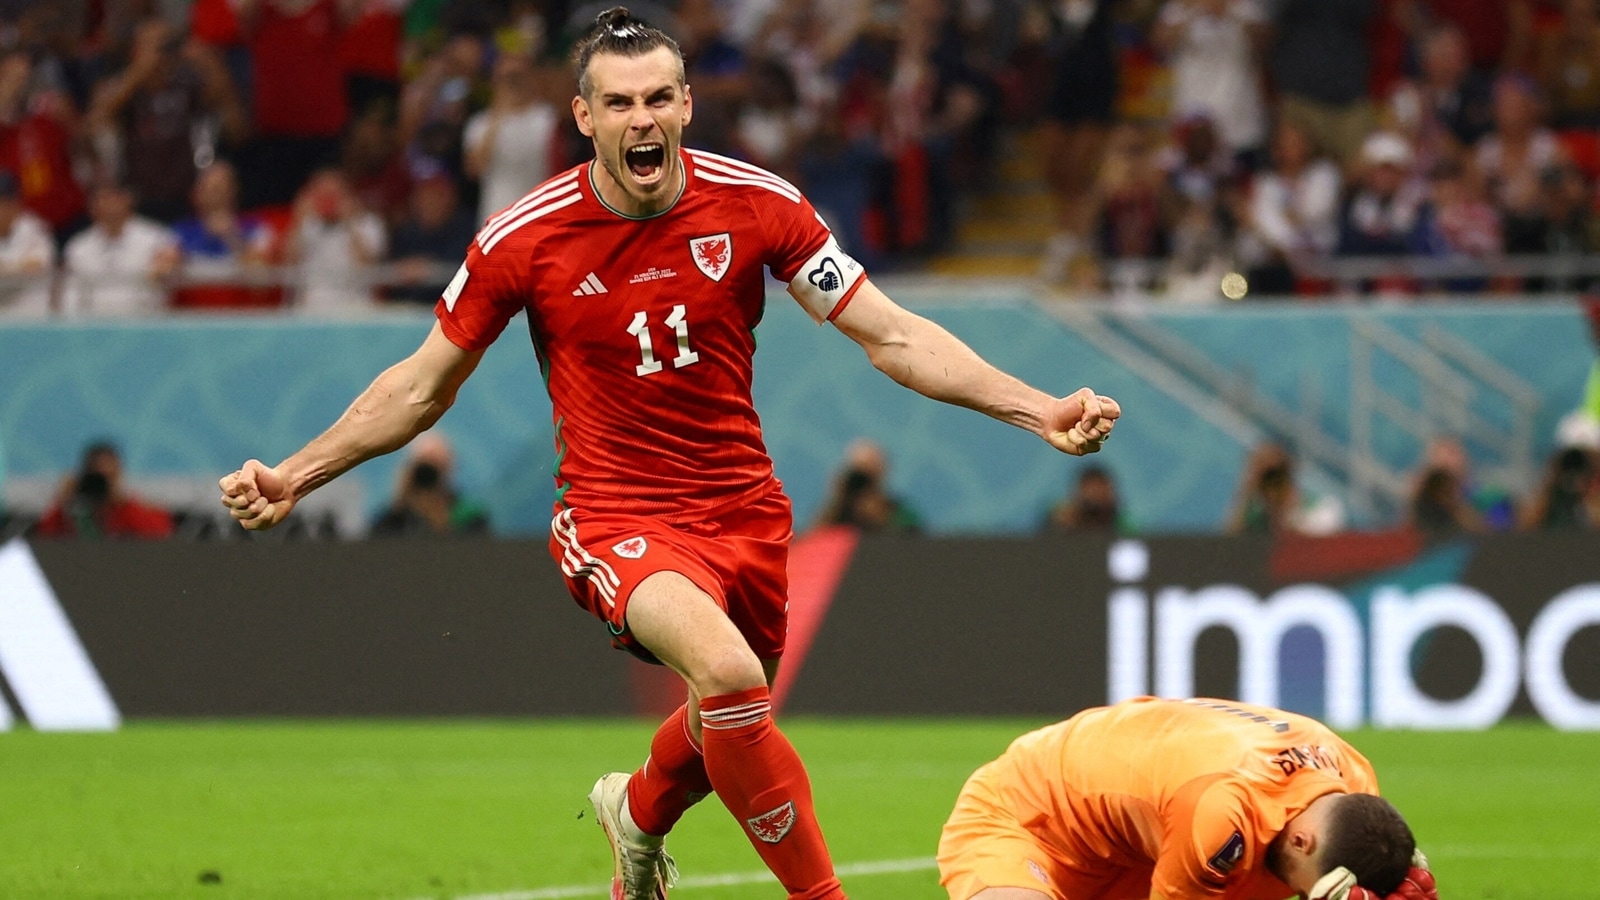 Bale denies USA full points, scores Wales’ first World Cup goal since 1958